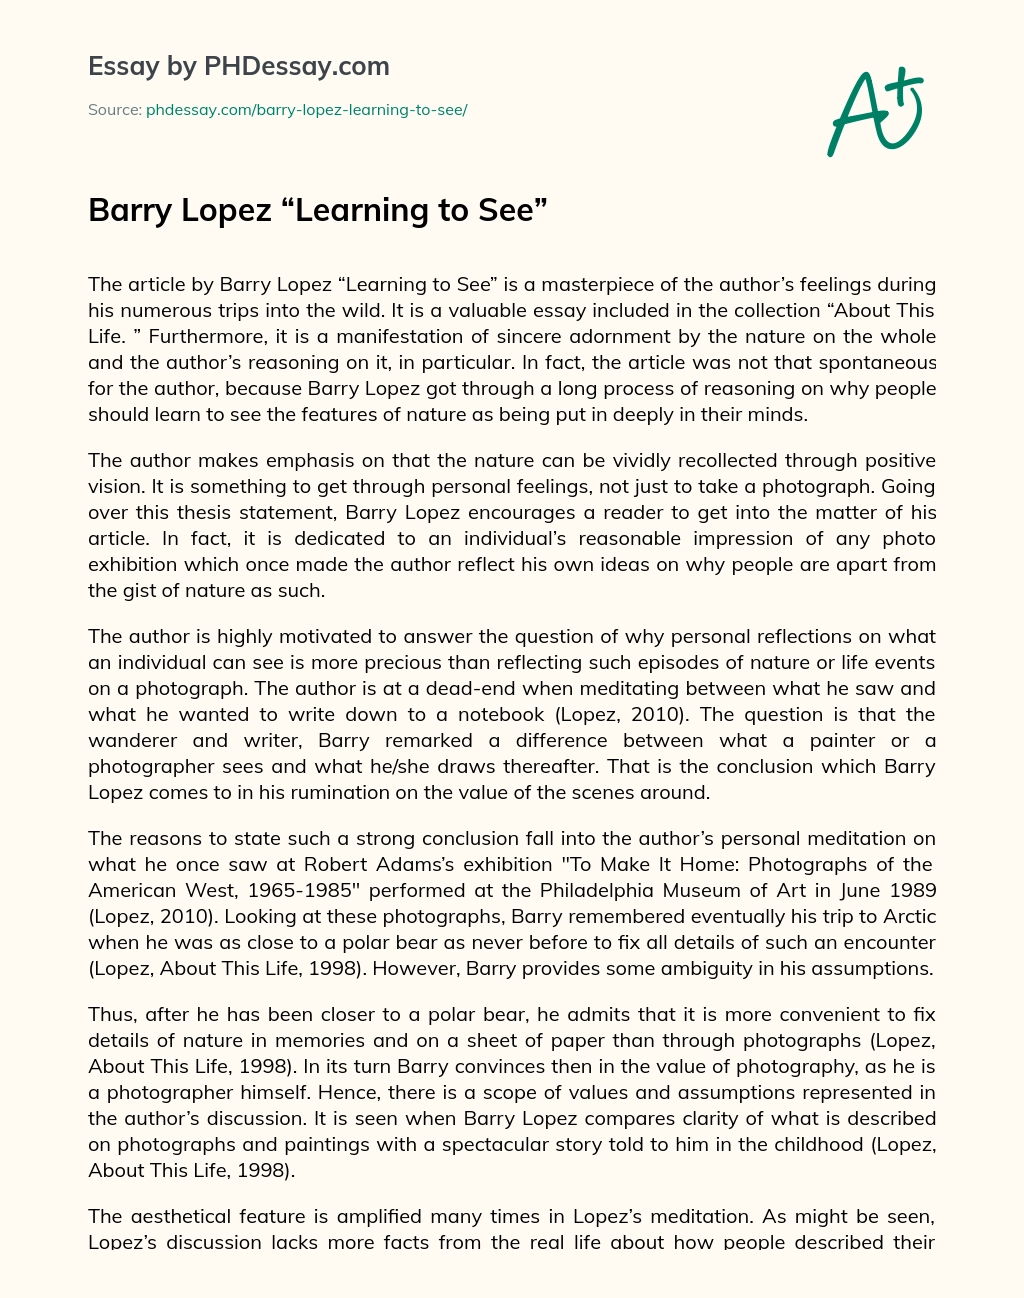 Barry Lopez “Learning to See” essay